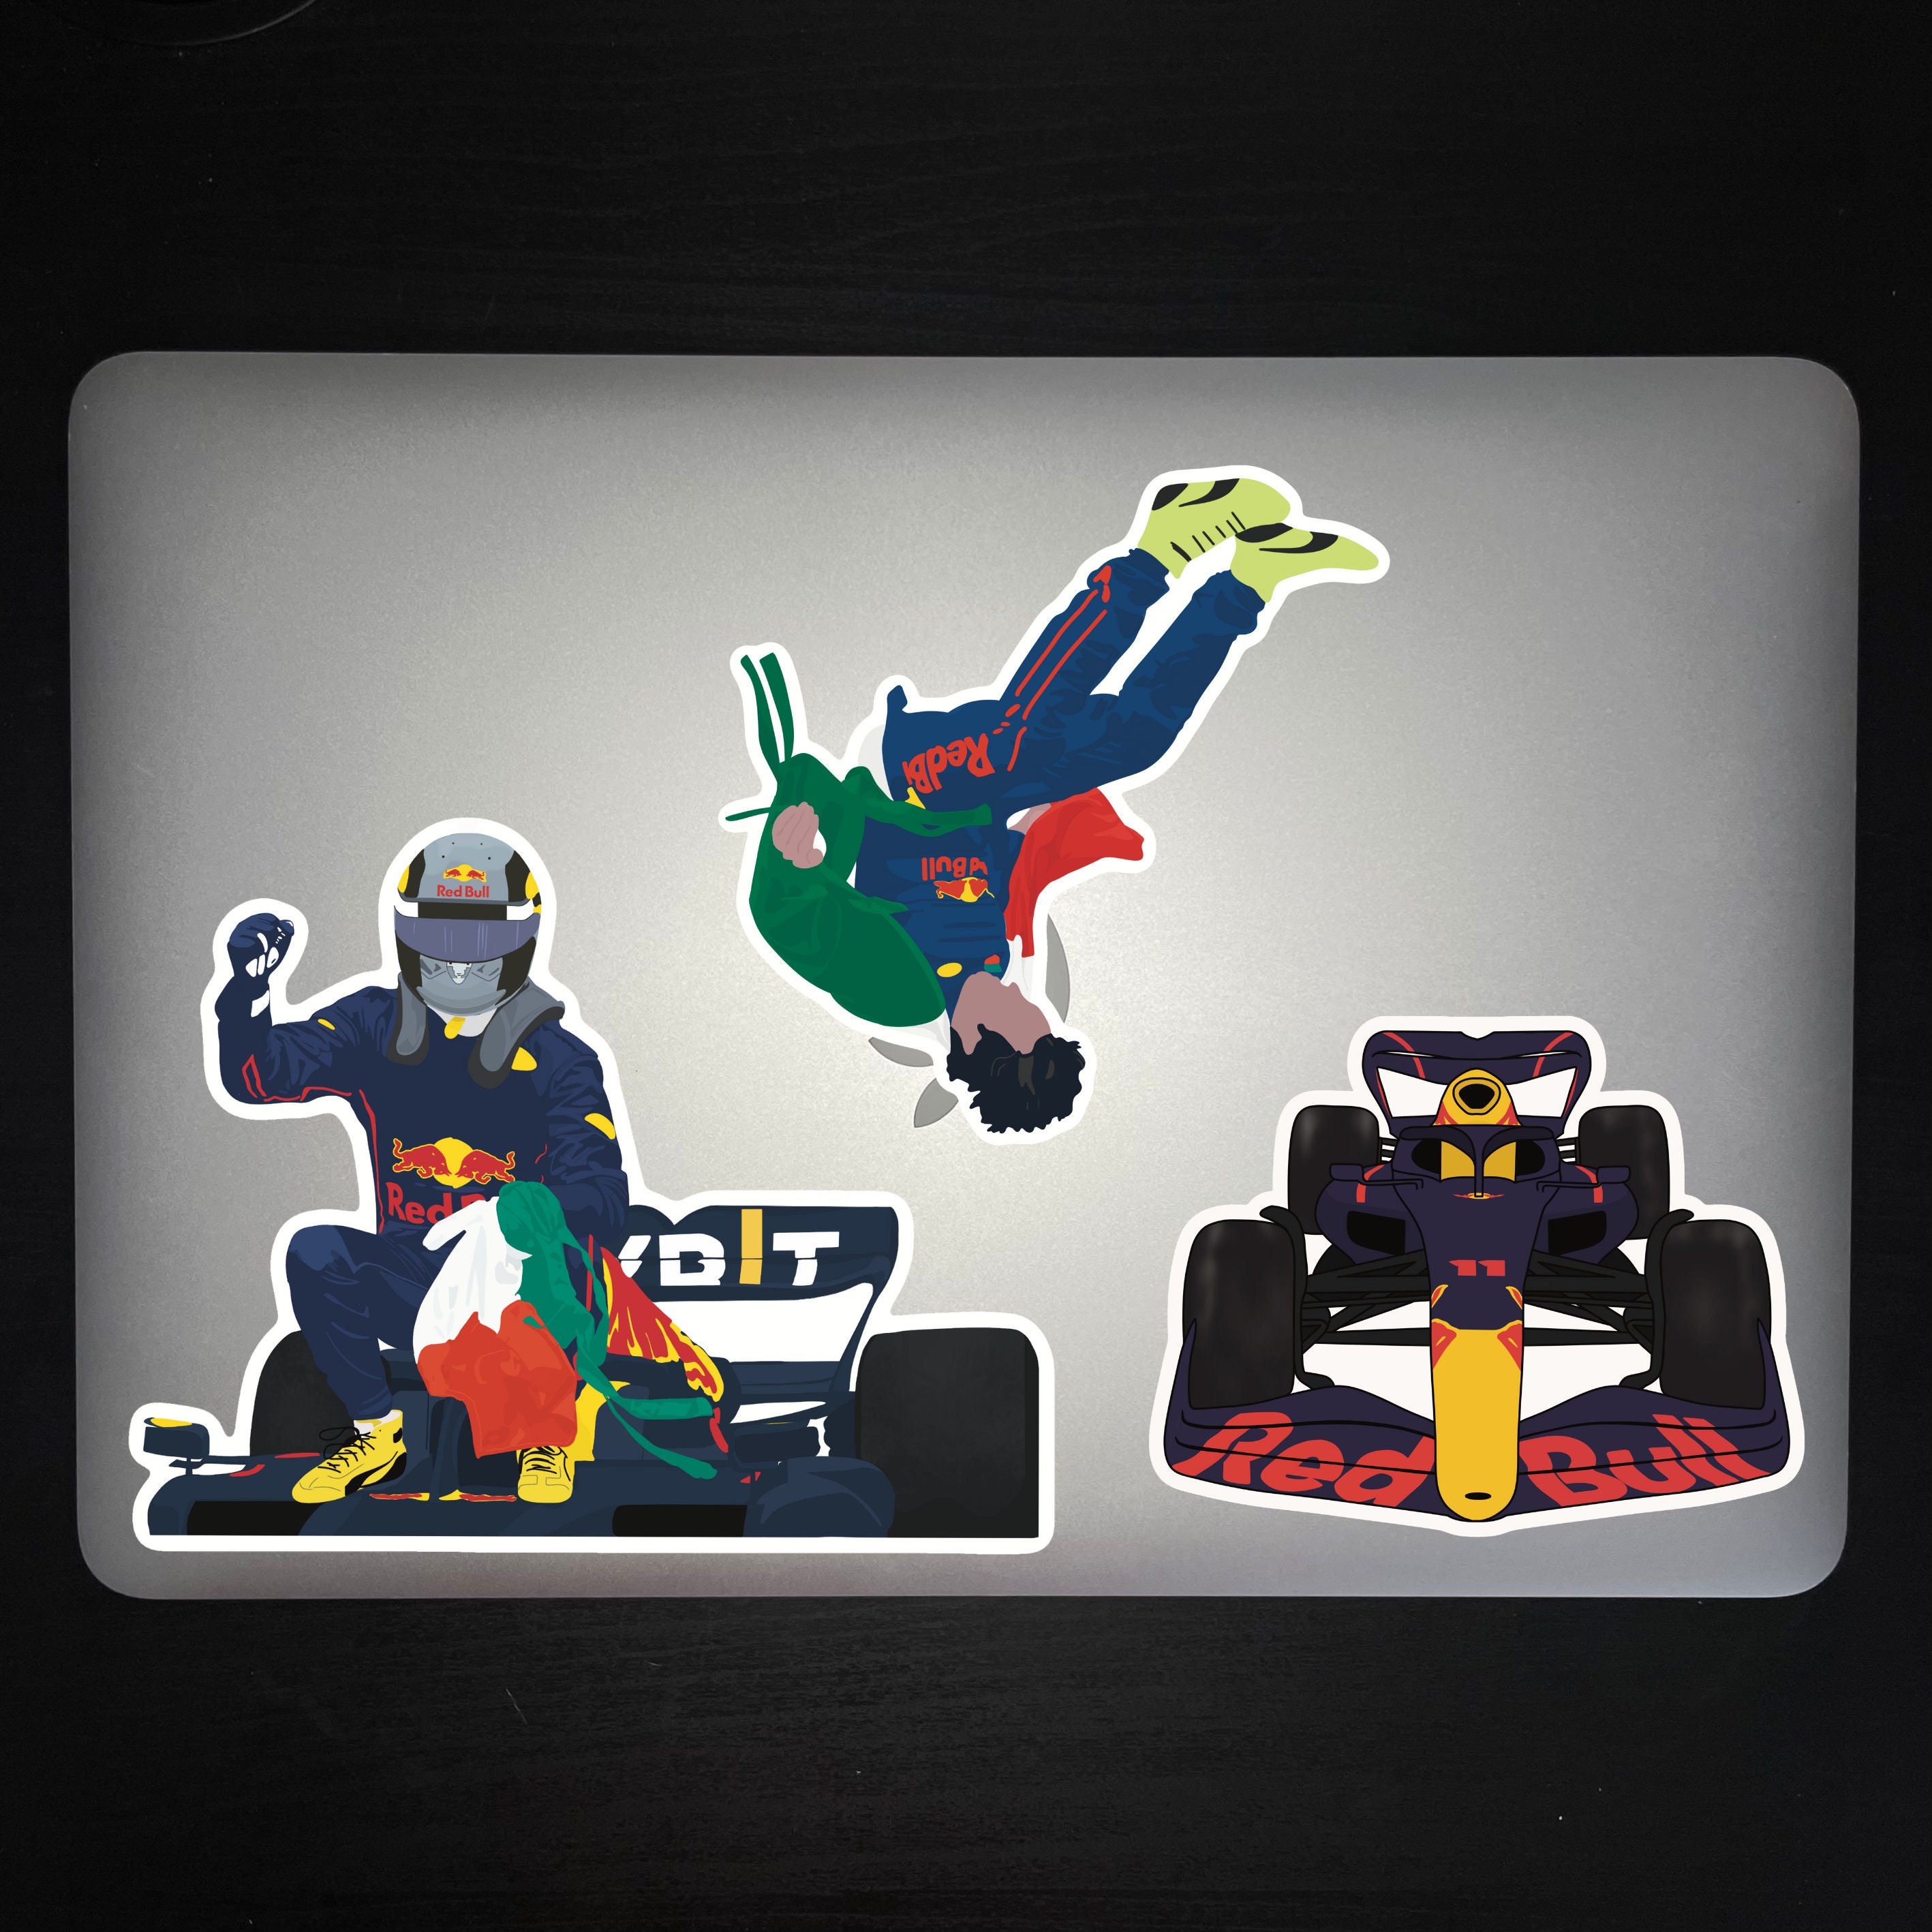 Redbull Stickers for Sale - Pixels